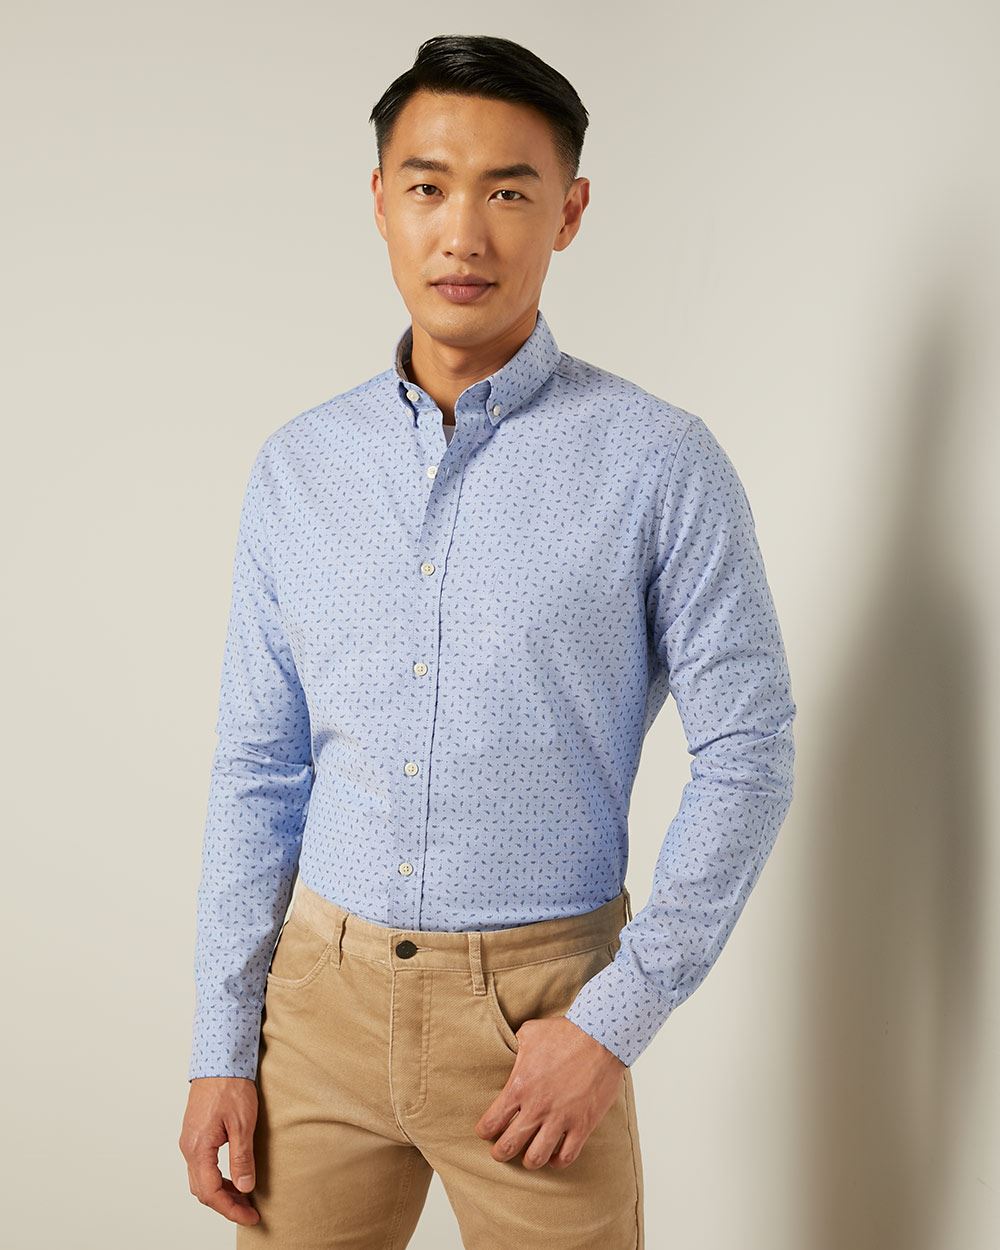 Tailored Fit Printed Oxford Shirt | RW&CO.